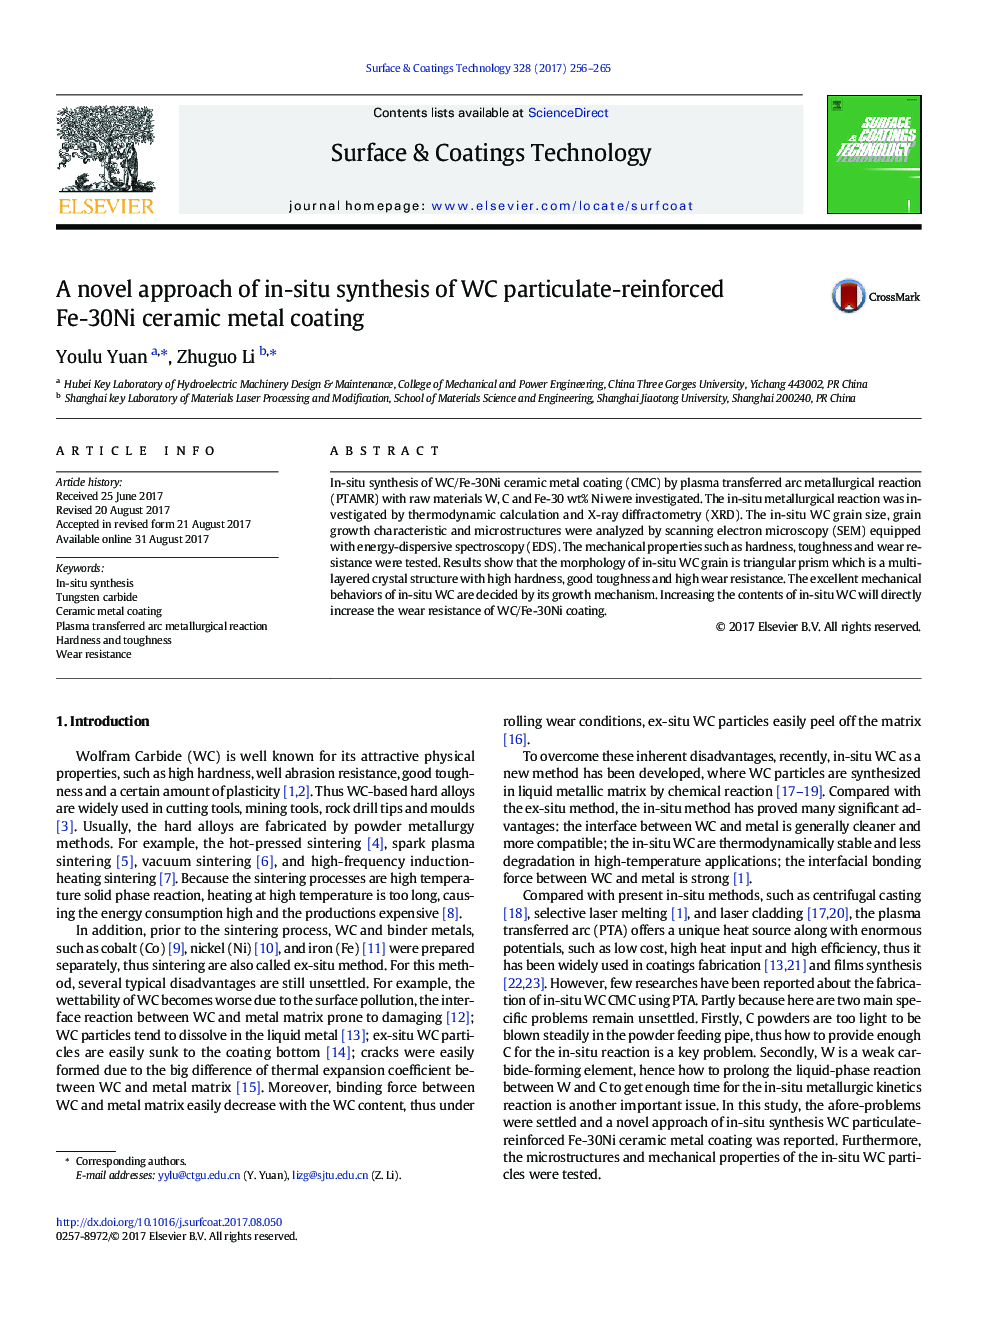 A novel approach of in-situ synthesis of WC particulate-reinforced Fe-30Ni ceramic metal coating